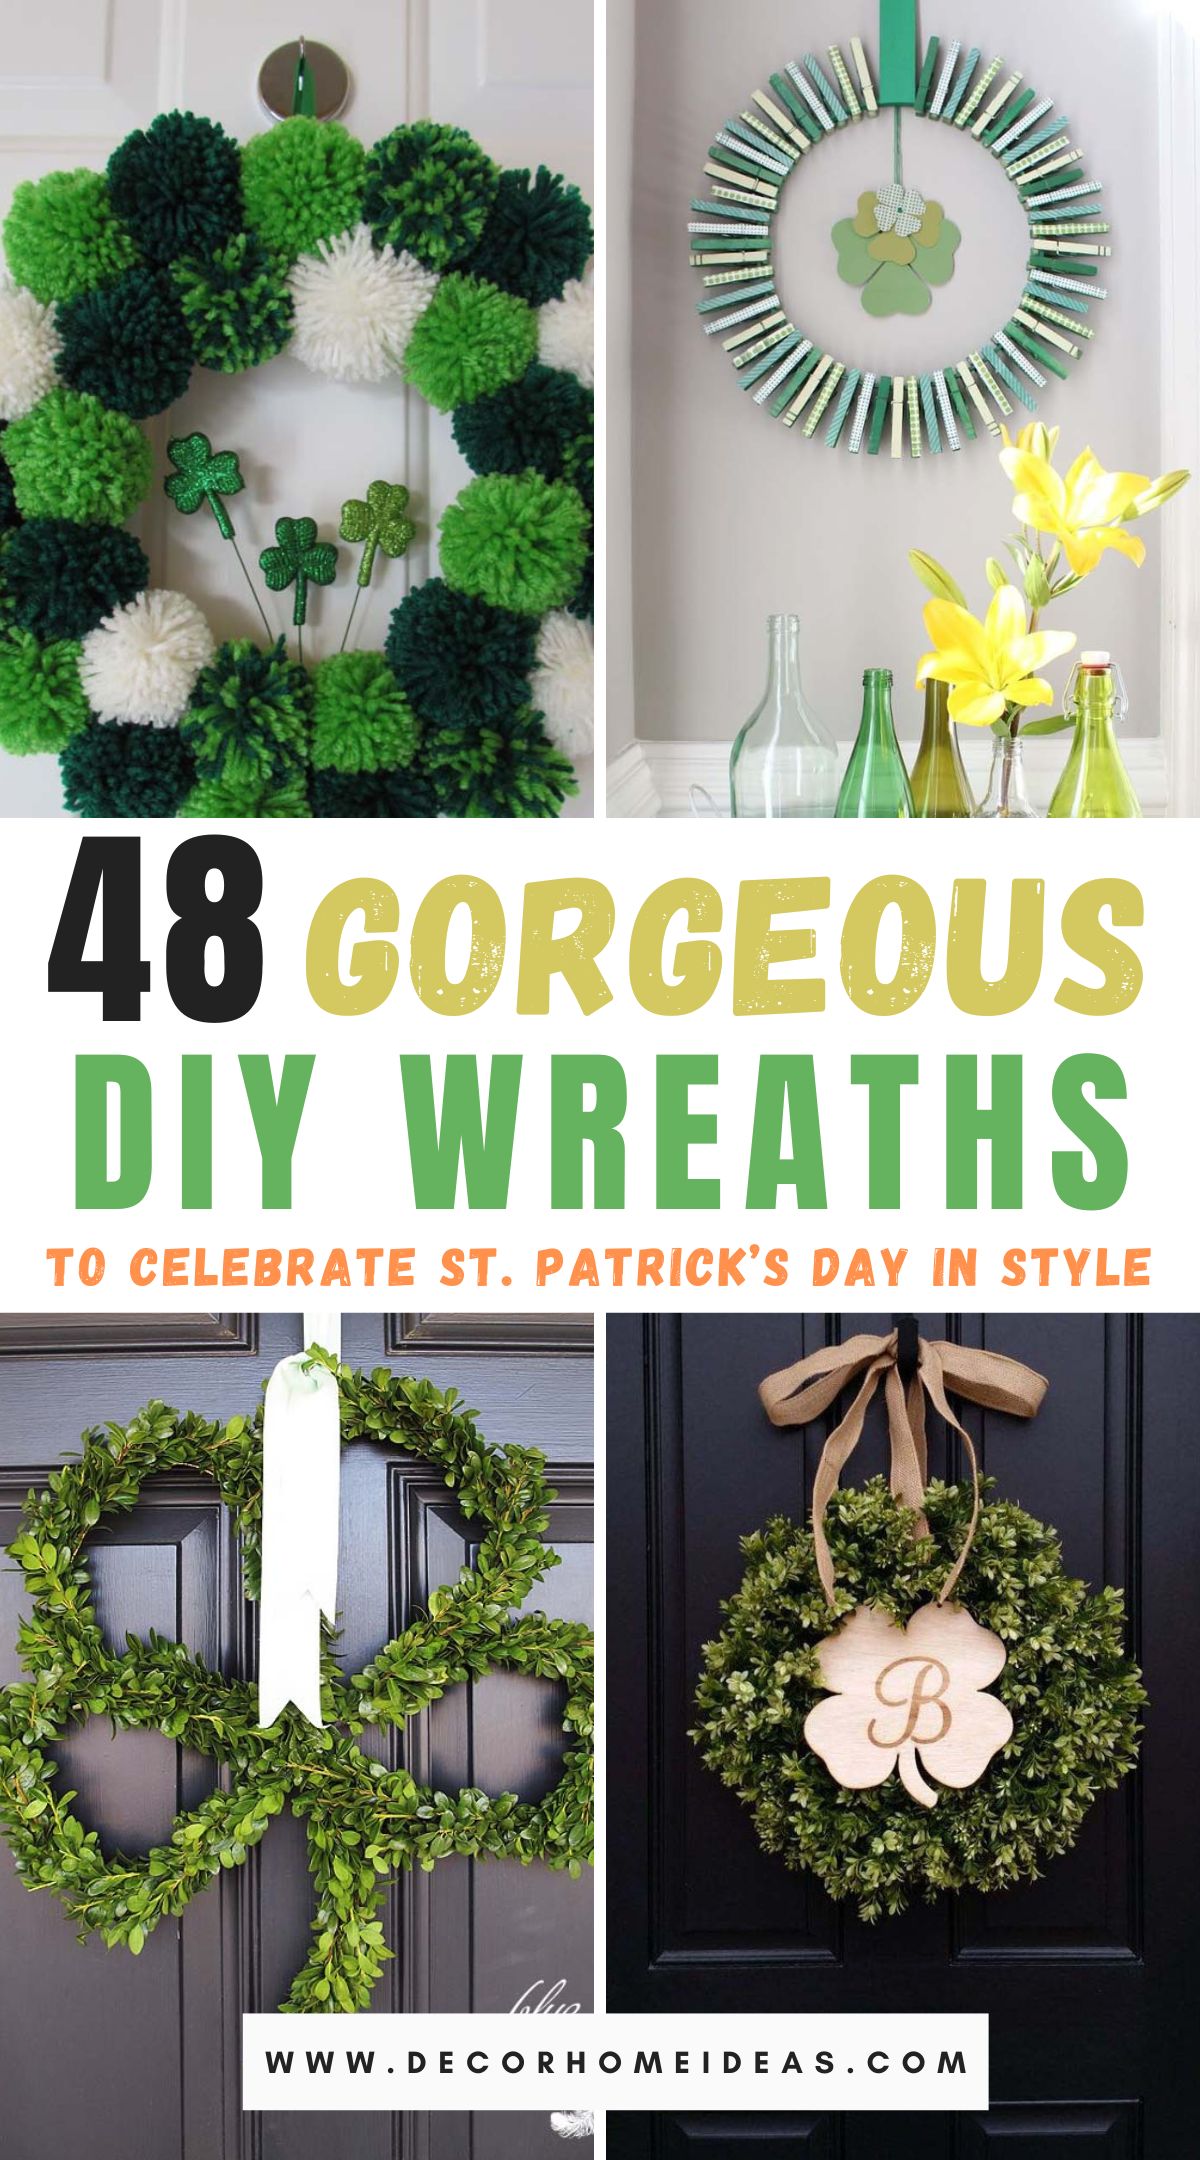 Celebrate St. Patrick's Day in style with 50 gorgeous DIY wreaths. From shamrock-adorned designs to rustic burlap creations, discover a plethora of inspiring projects to adorn your door and welcome the luck of the Irish into your home with flair and elegance.